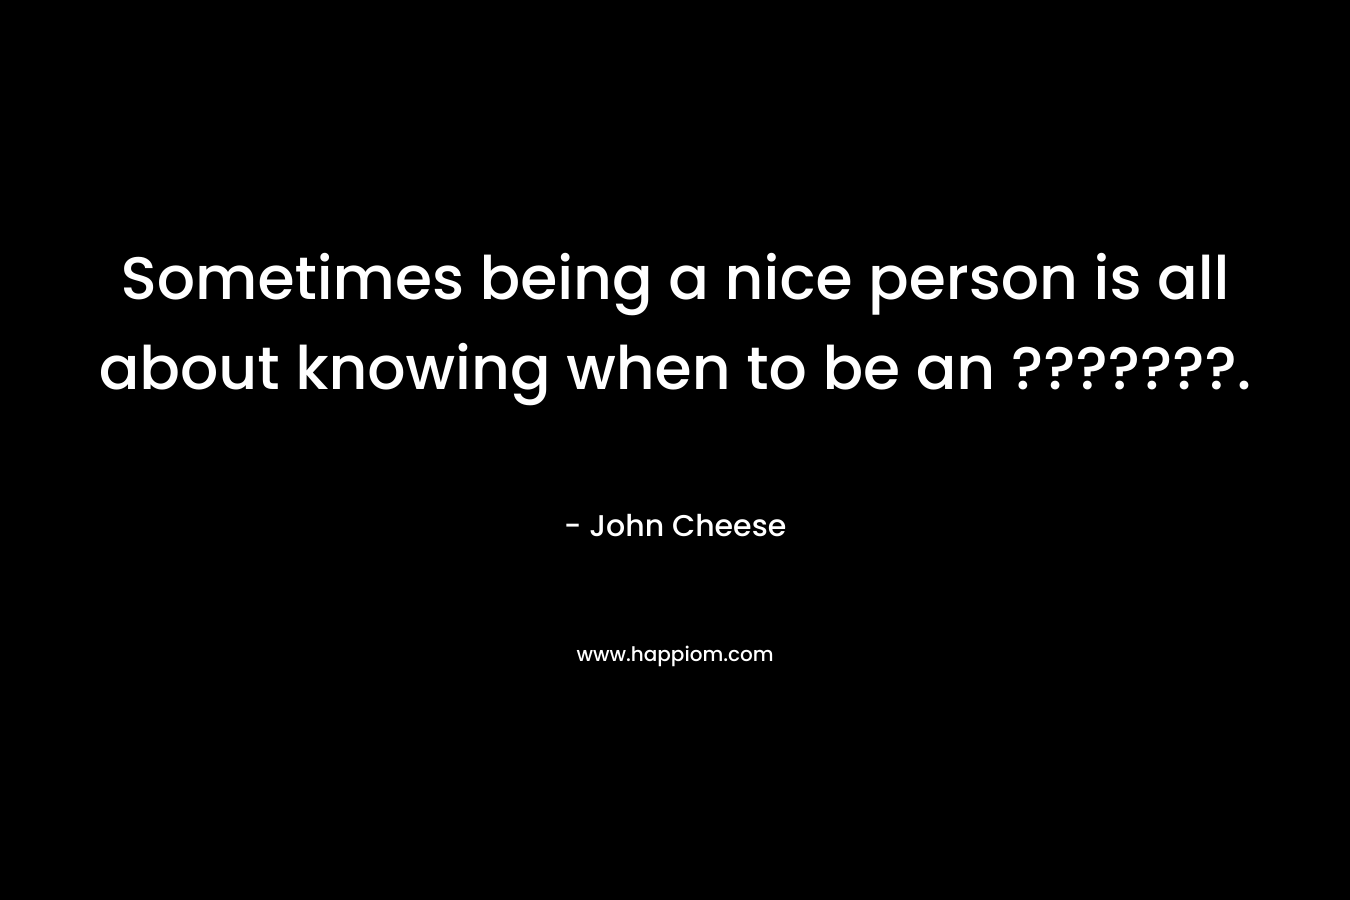 Sometimes being a nice person is all about knowing when to be an ???????. – John Cheese